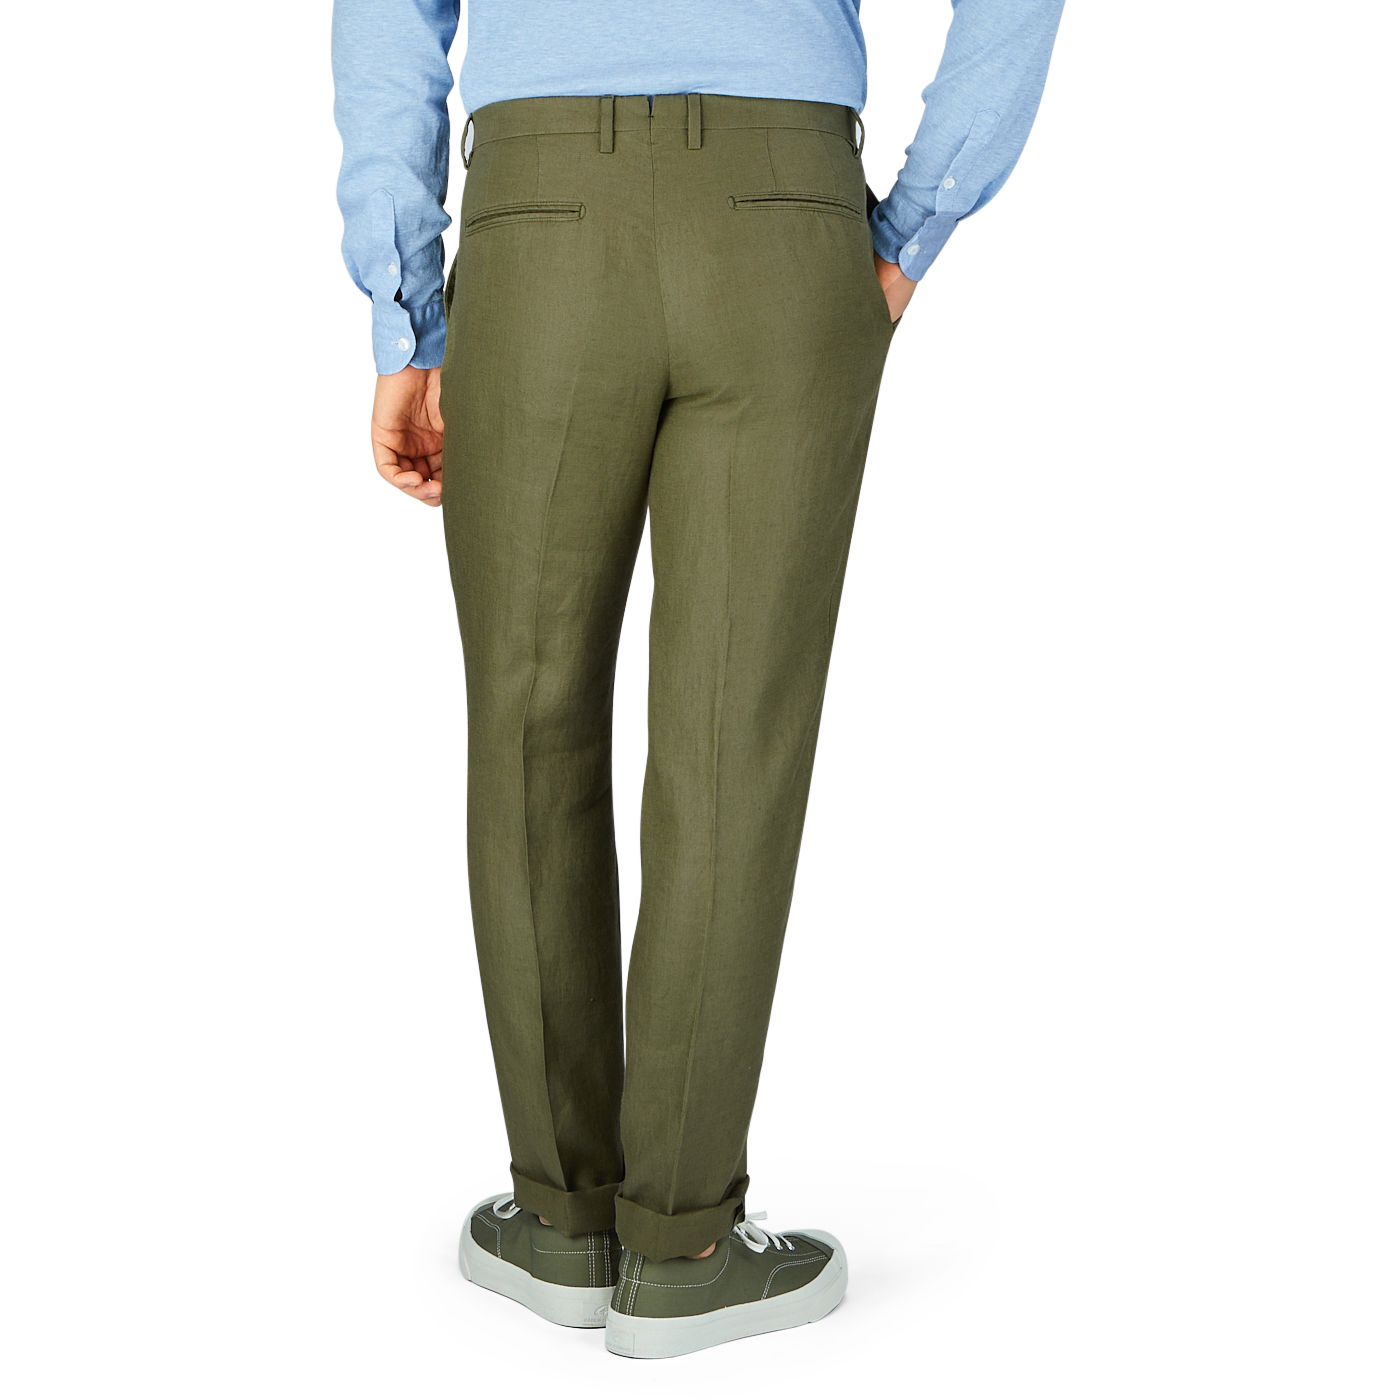 A person standing in Boglioli green washed Irish linen trousers and gray sneakers paired with a light blue shirt.